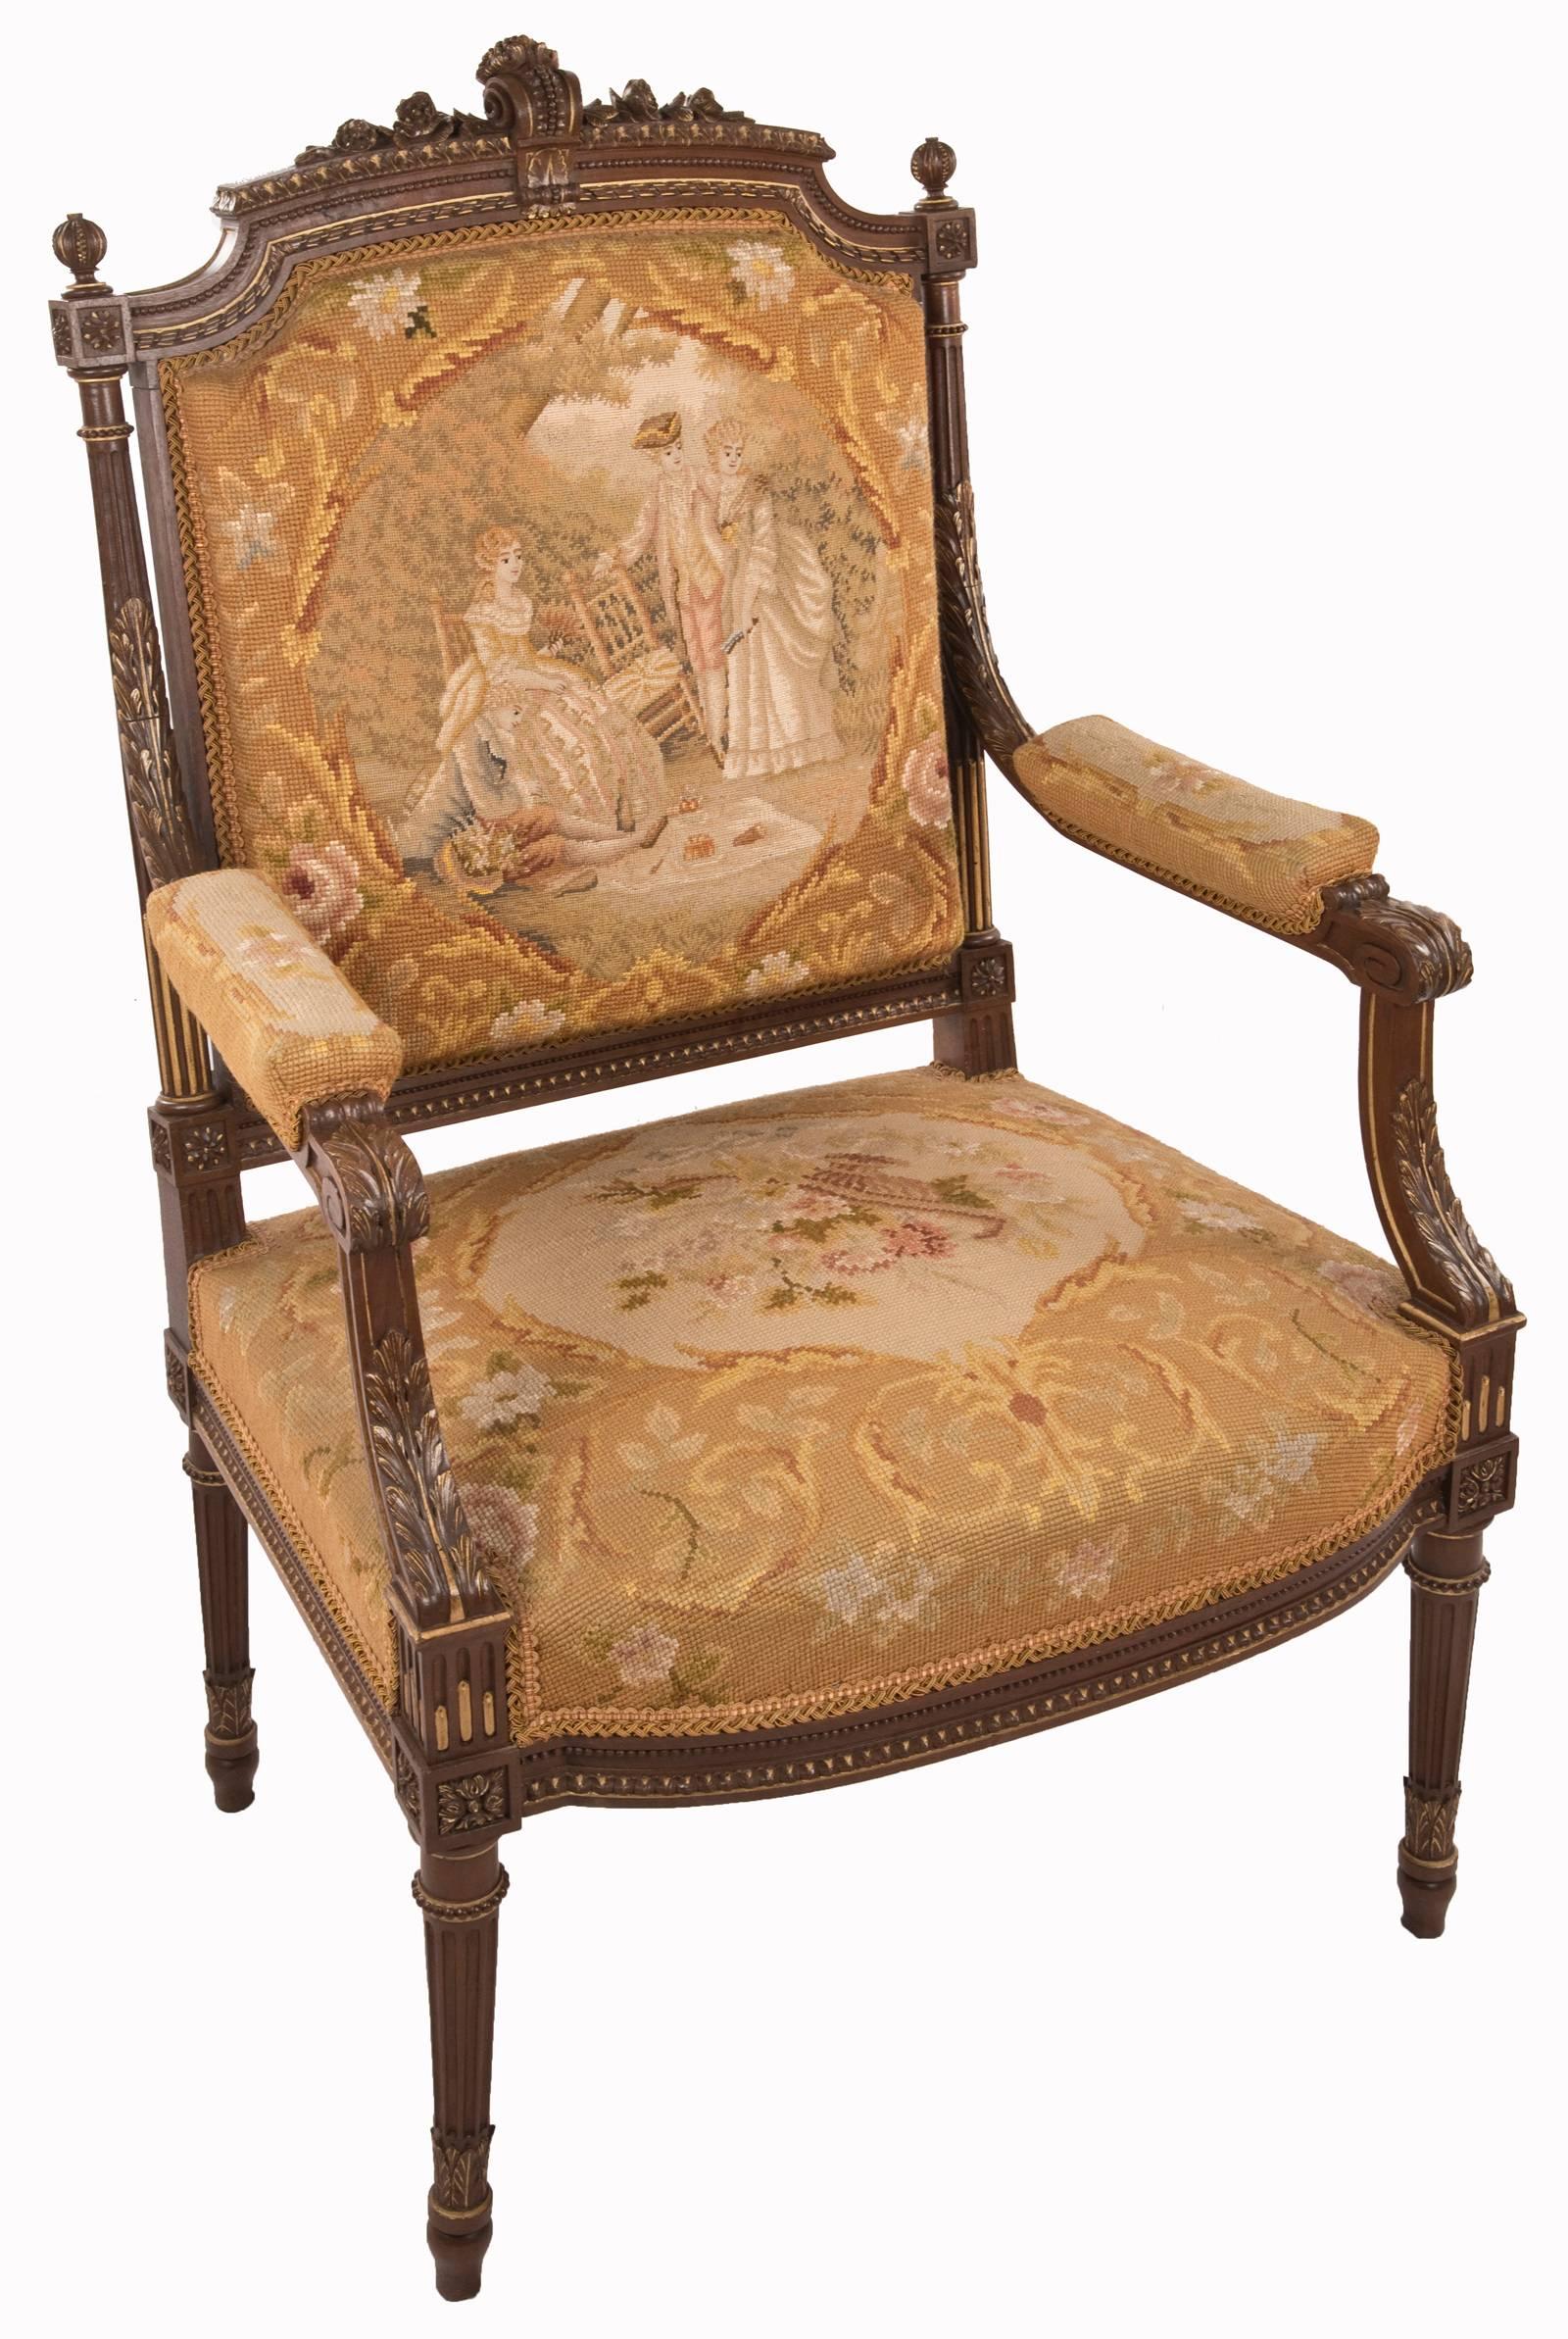 A set of four 19th century Louis XVI style needlepoint-upholstered armchairs made of walnut. A carved scroll and flowers decorate the crest rail of the chair, which is flanked by round finials atop fluted stiles carved with acanthus leaves. The